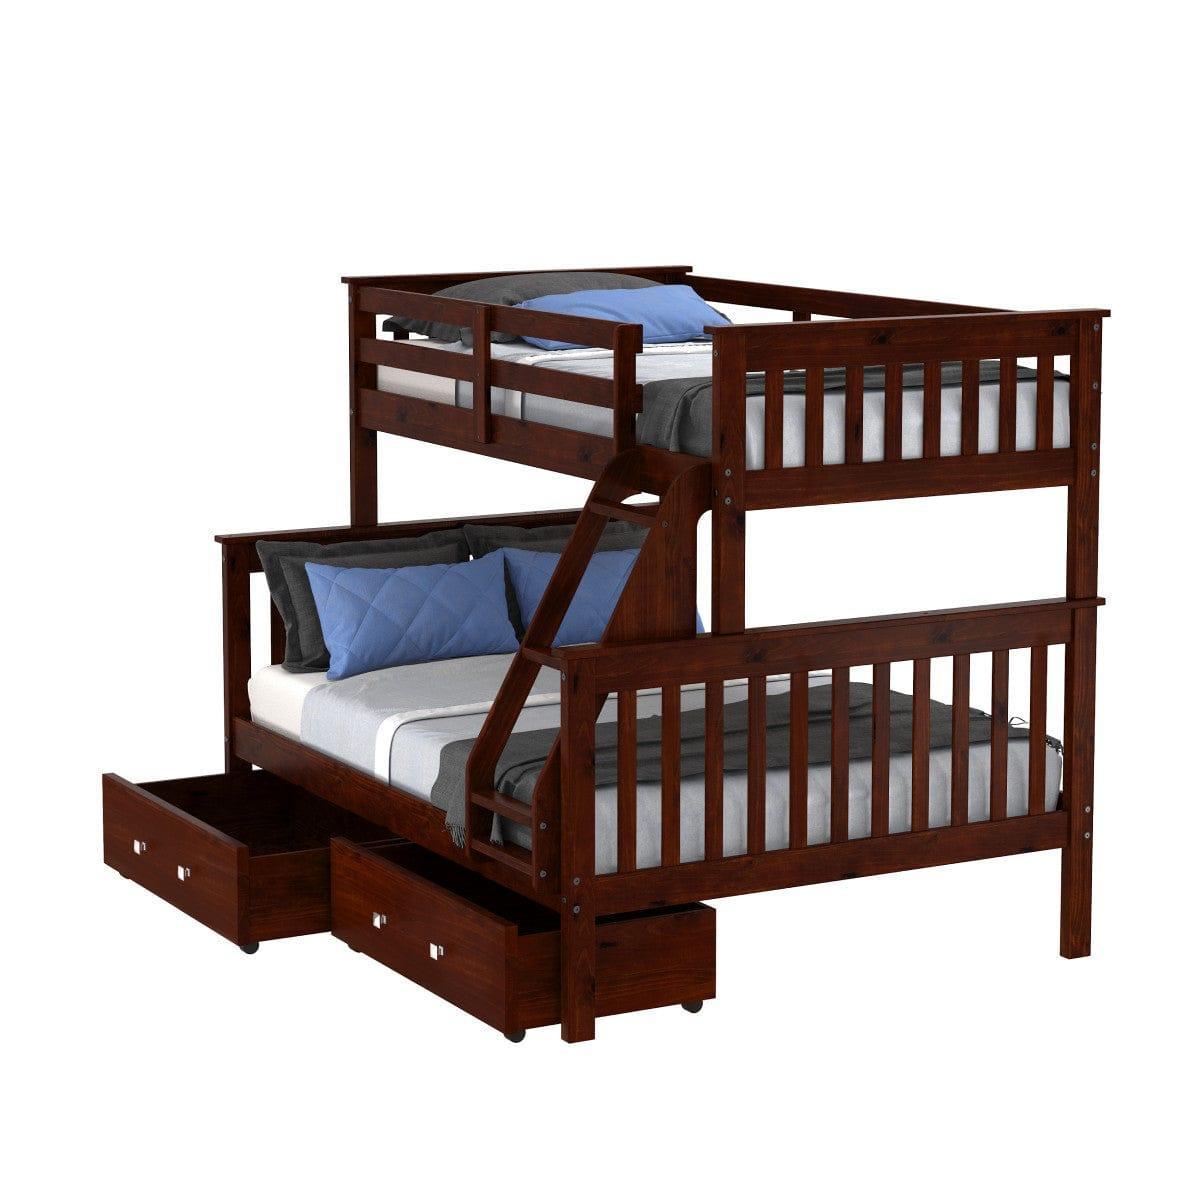 Donco Twin/Full Mission Bunk Bed W/Dual Under Bed Drawers In Dark Cappuccino Finish 122-3-TFCP_505-CP - Bedroom Depot USA